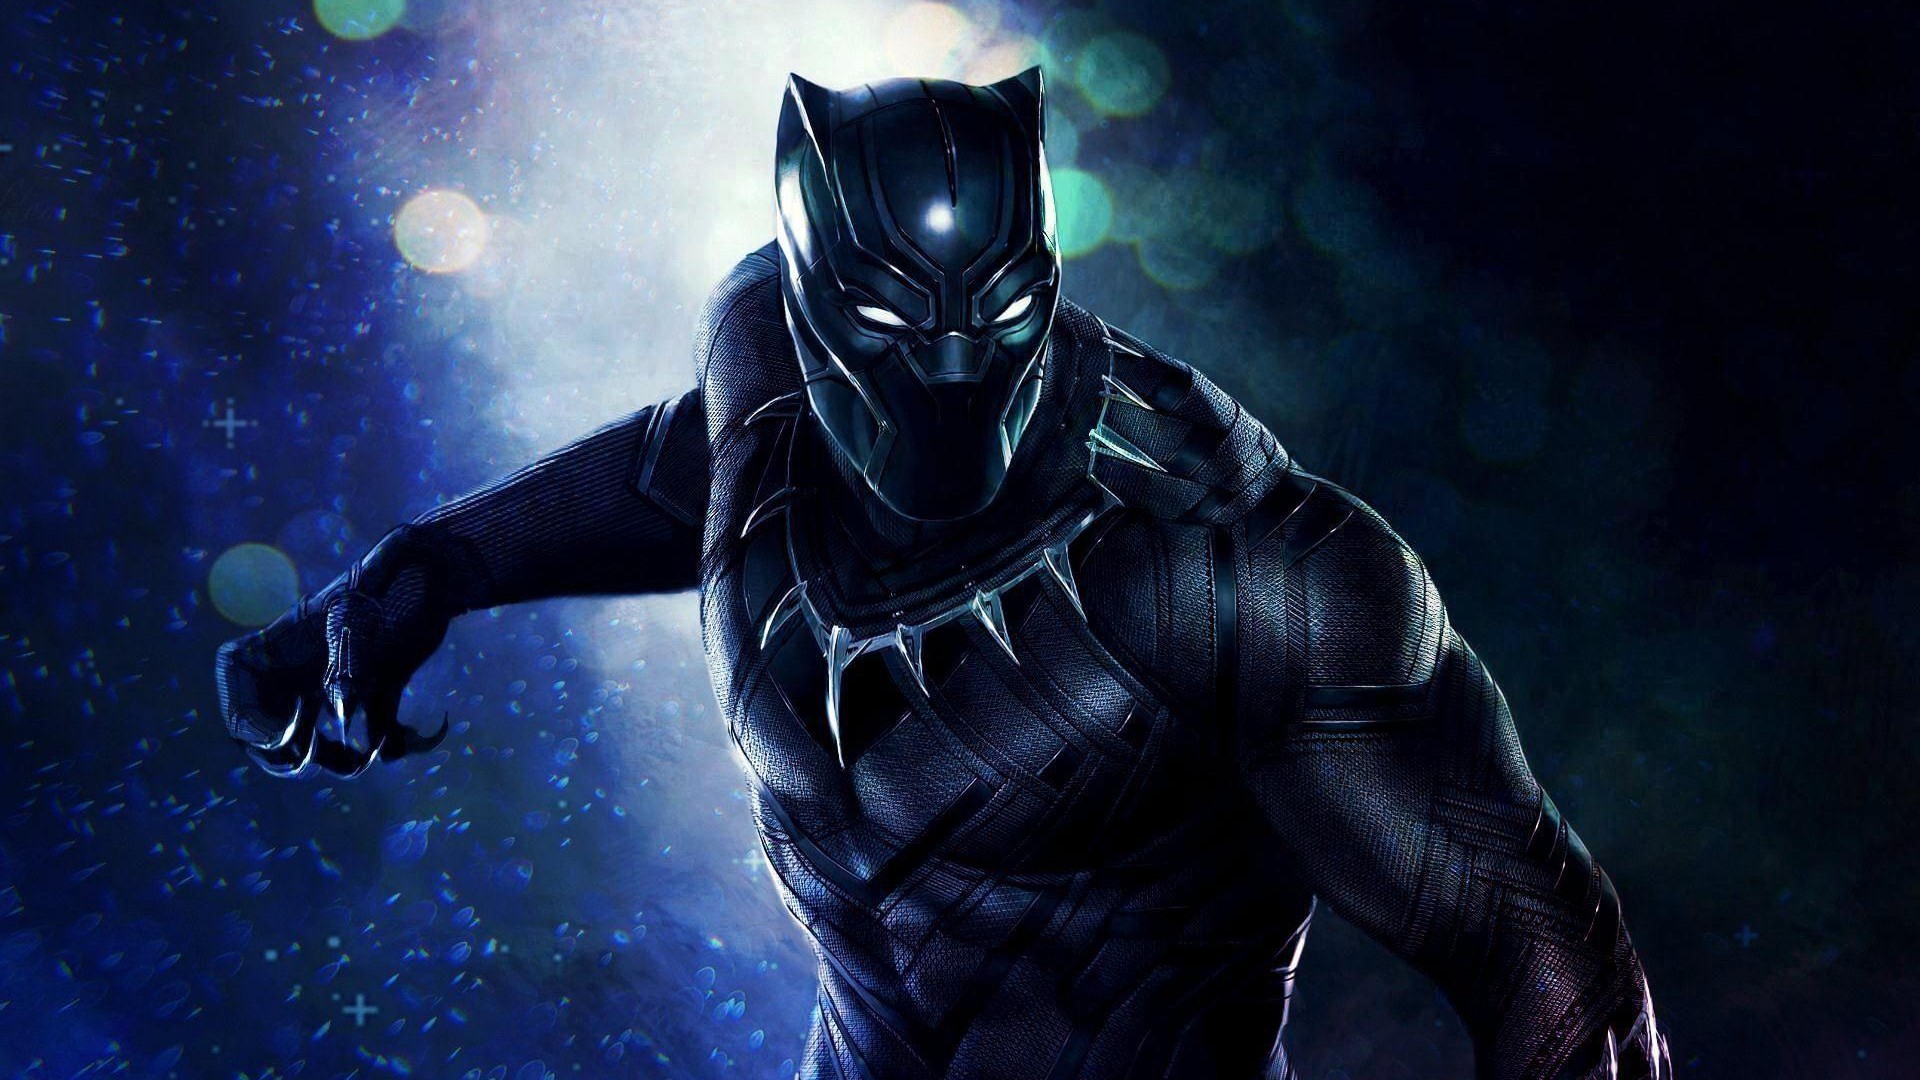 Black Panther Superhero Wallpaper For Desktop with high-resolution 1920x1080 pixel. You can use this poster wallpaper for your Desktop Computers, Mac Screensavers, Windows Backgrounds, iPhone Wallpapers, Tablet or Android Lock screen and another Mobile device